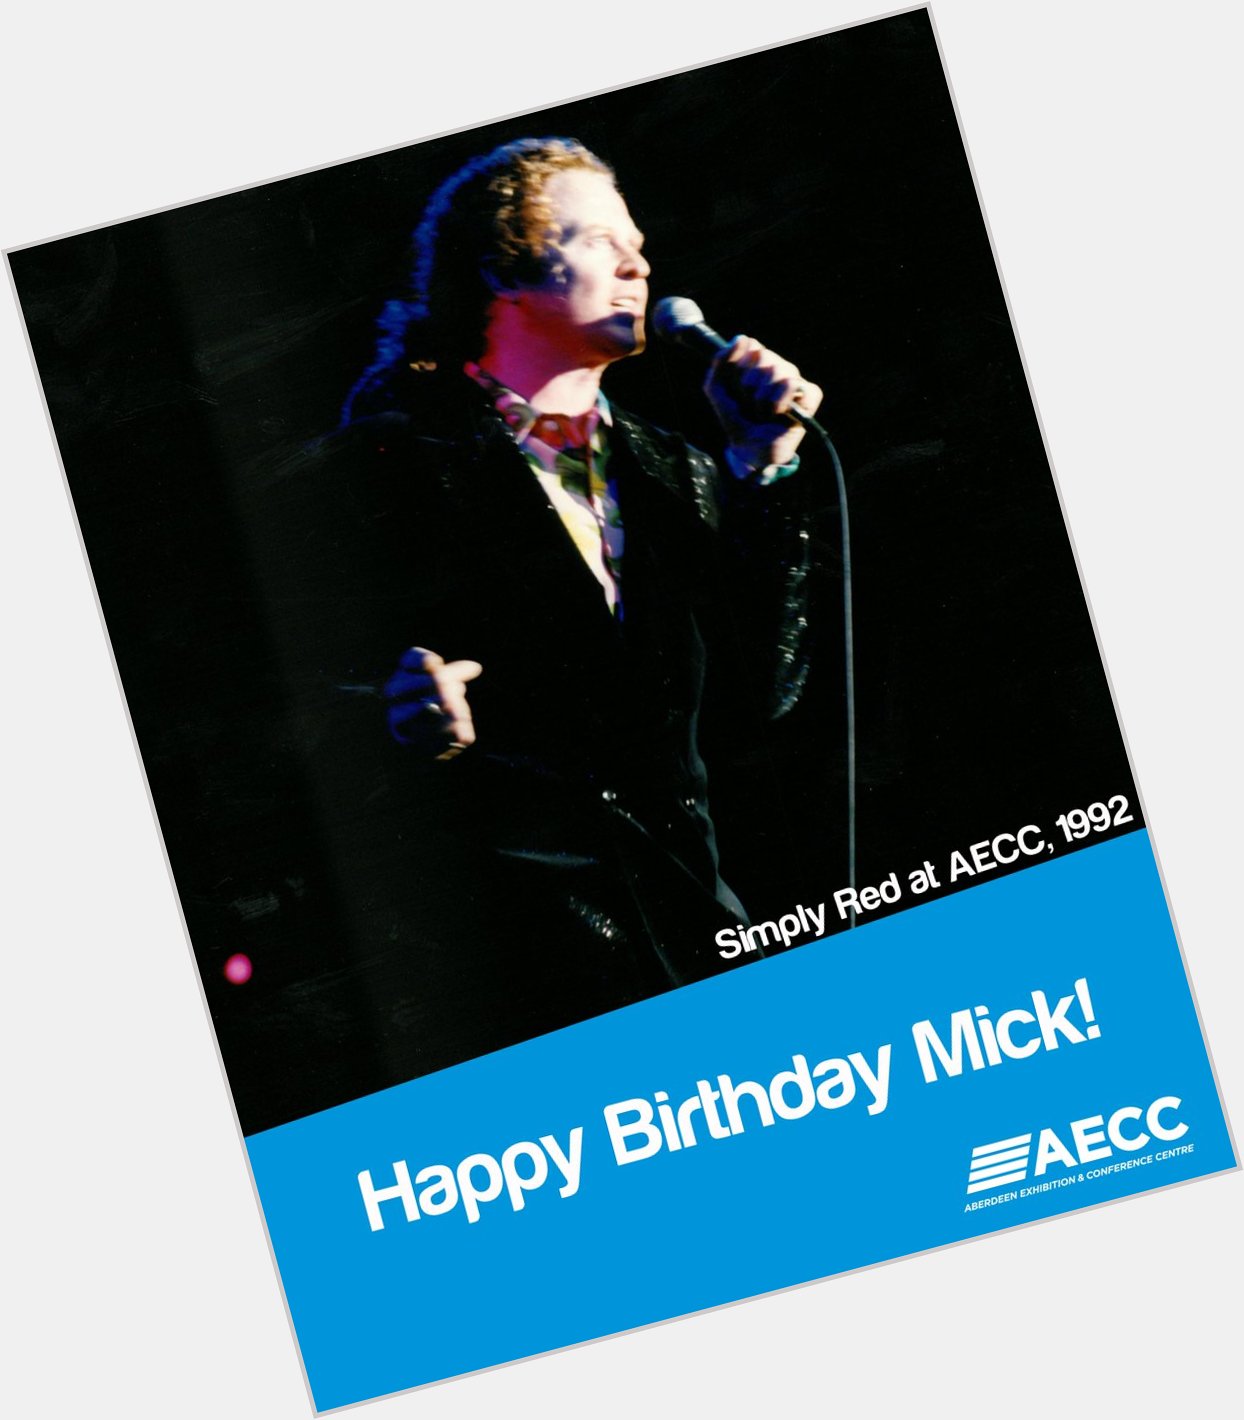 Happy Birthday Mick Hucknall ! Look forward to welcoming you to Aberdeen on 6th December! 